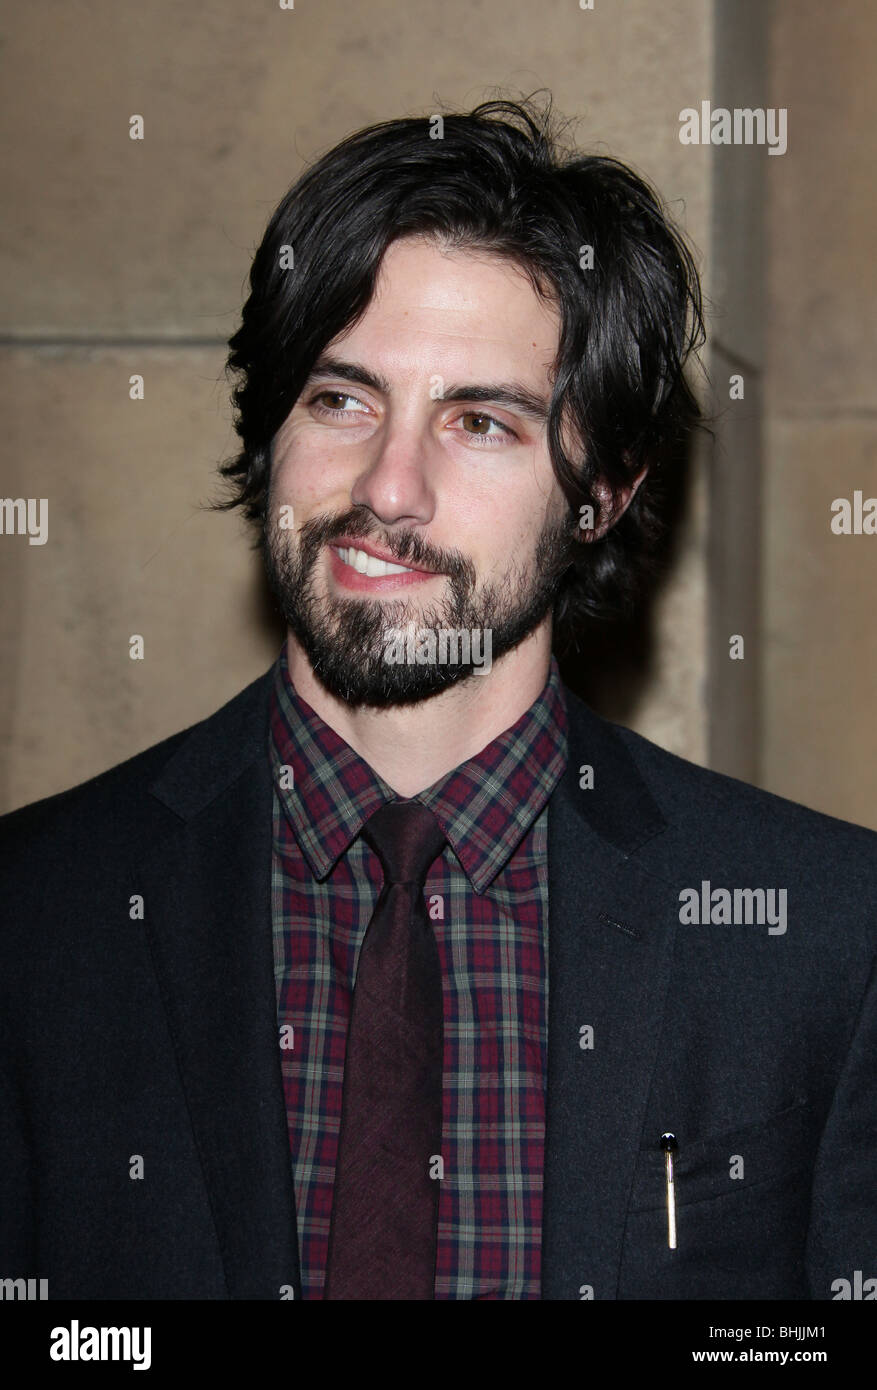 MILO VENTIMIGLIA ONE SHOW ENTERAINMENT THE BEST OF THE BEST IN ADVERTIAING AND ENTERTAINMENT HOLLYWOOD LOS ANGELES CA USA 17 Stock Photo